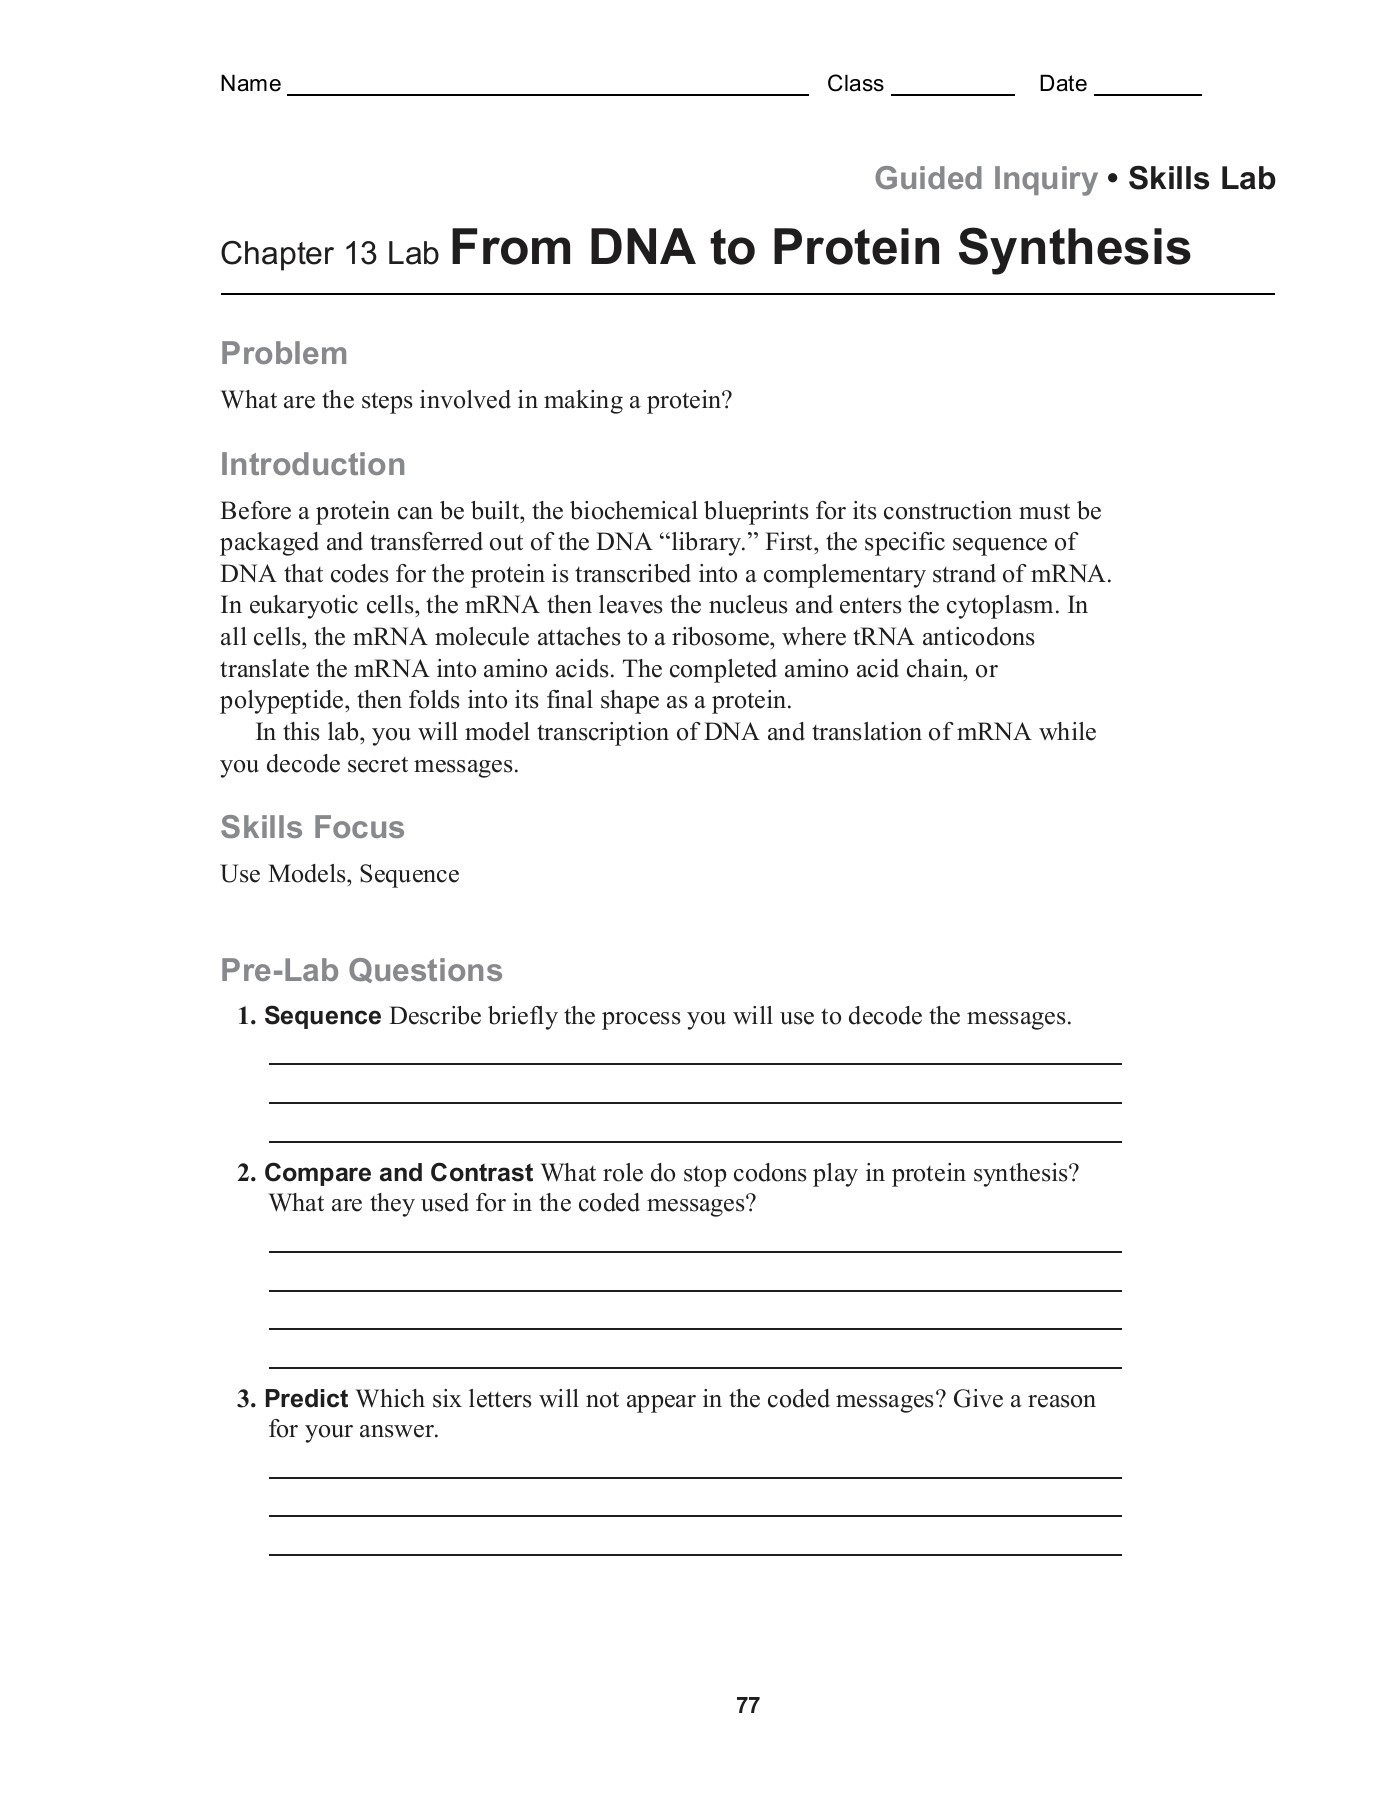 Protein Synthesis Practice Worksheet Guided Inquiry Skills Lab Chapter 13 Lab From Dna to